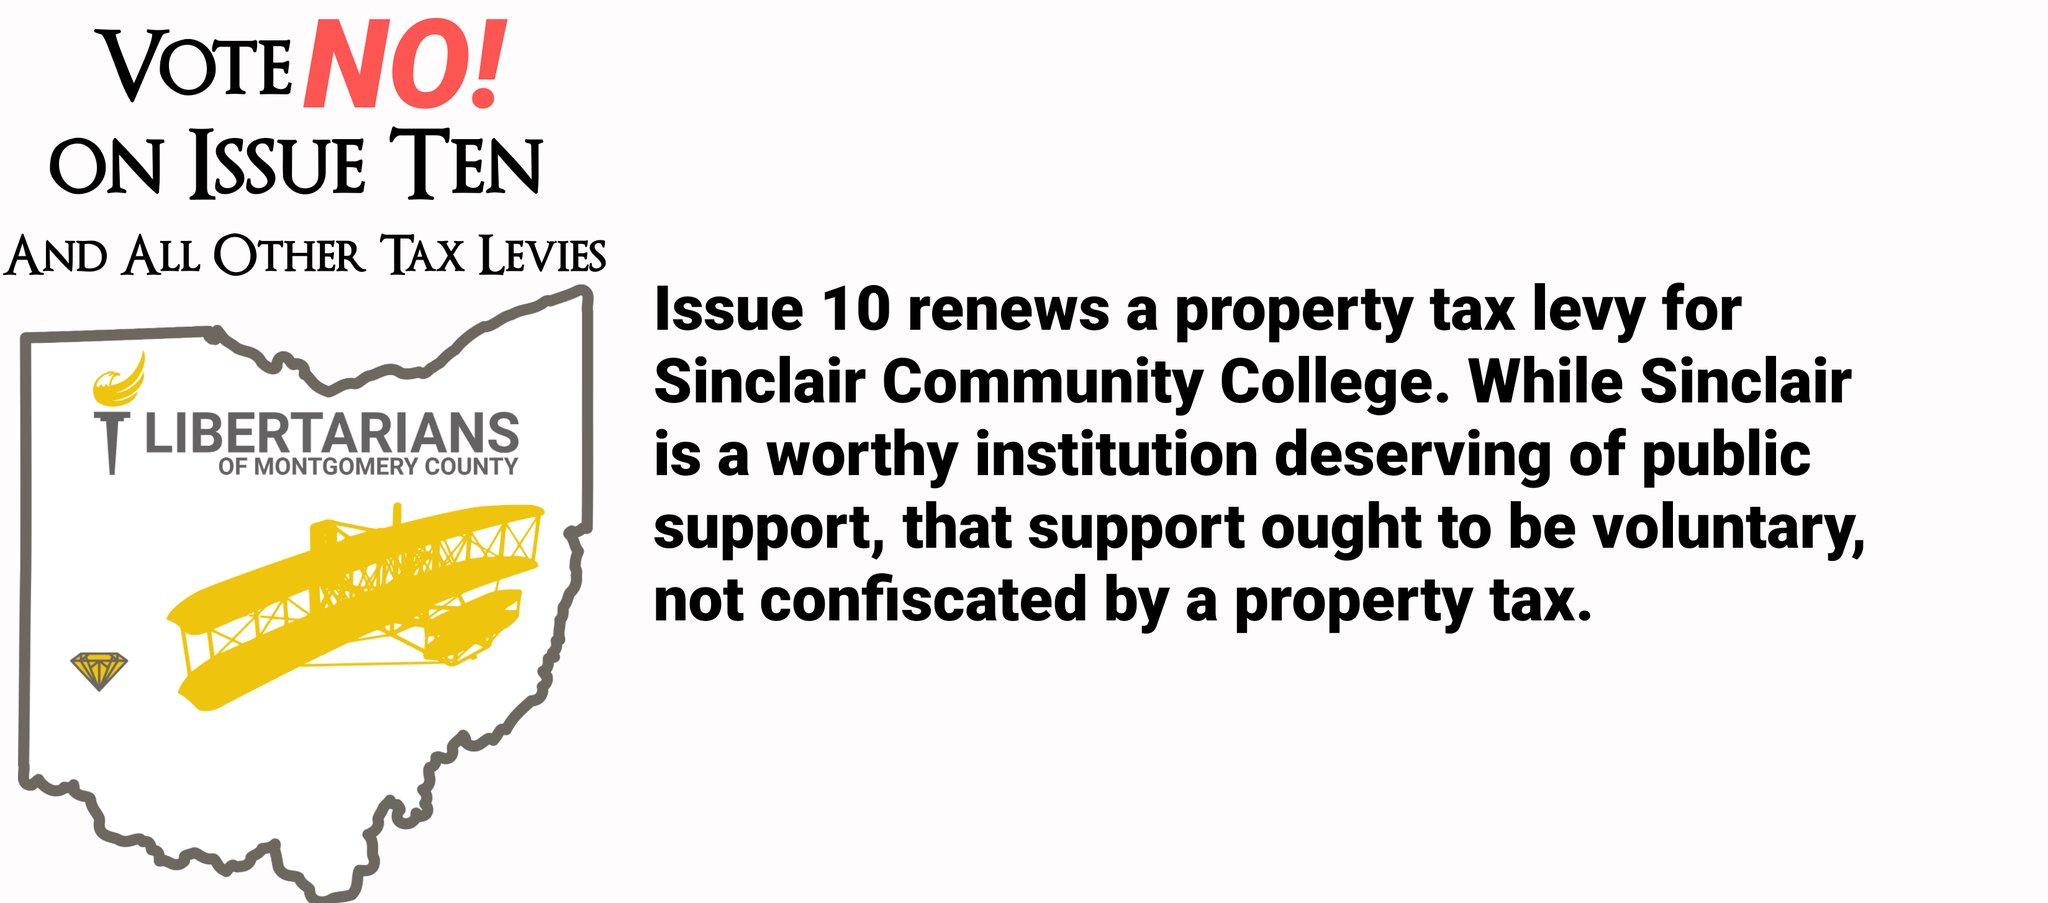 Issue 10 renews a property tax levy for Sinclair Community College. While Sinclair is a worthy institution deserving of public support, that support ought to be voluntary, not confiscated by a property tax. We recommend voting No on Issue 10, and all other tax levies.